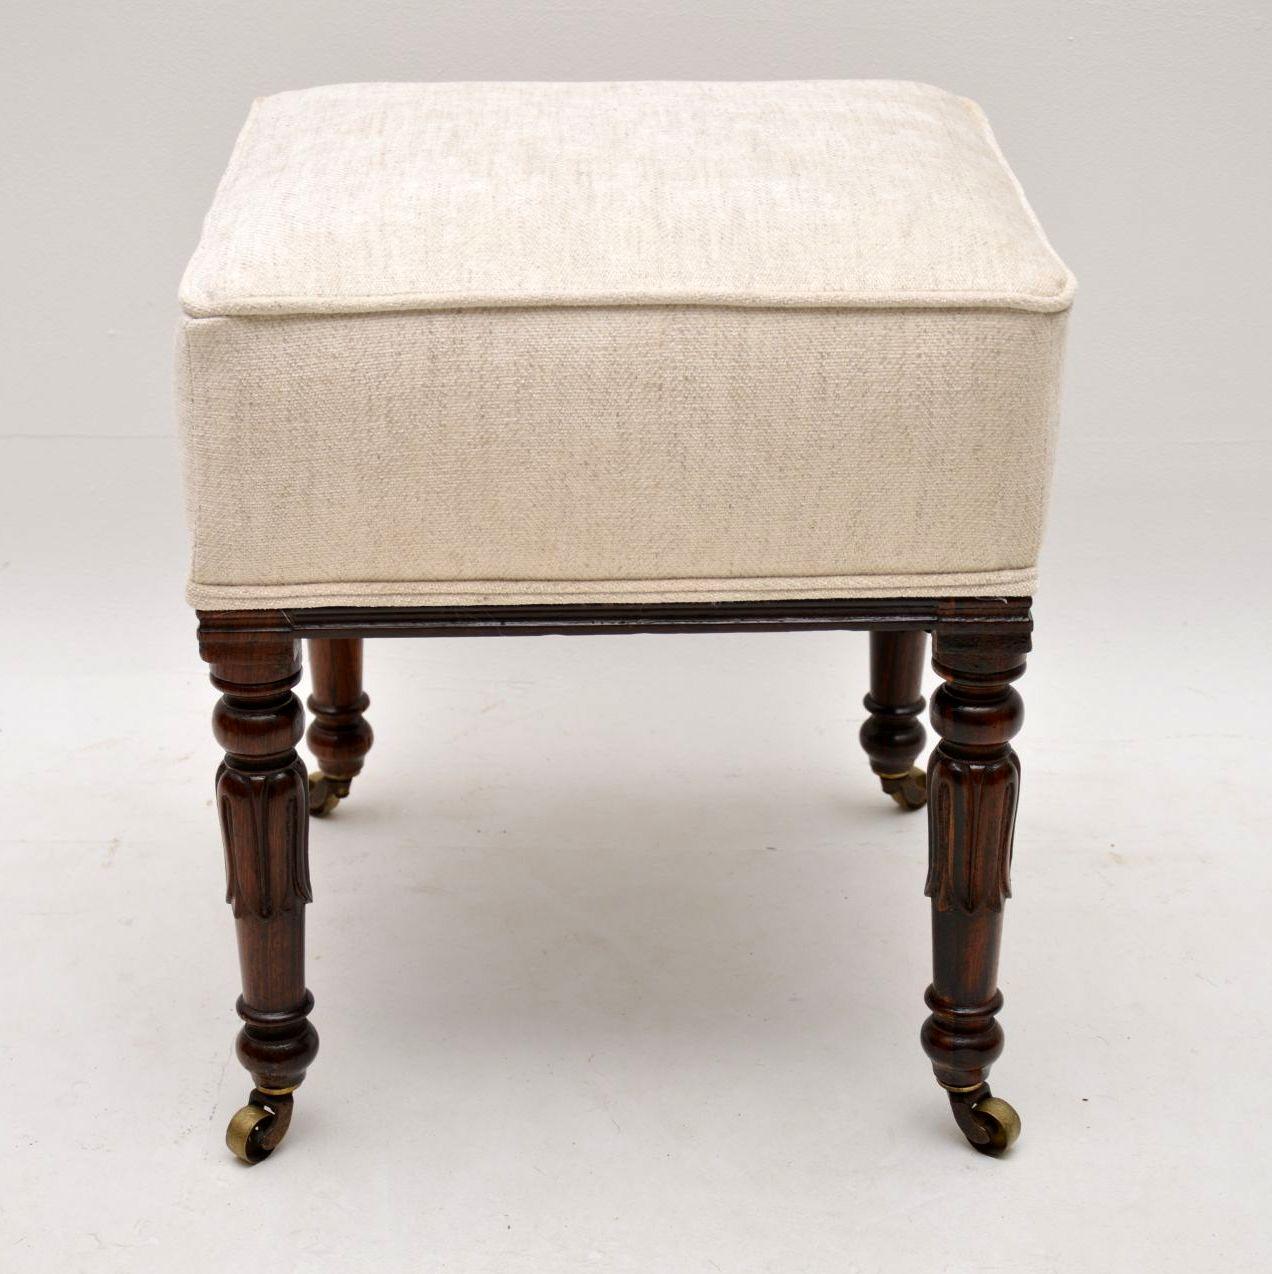 Antique William IV rosewood stool in excellent condition, dating from the 1830-37 period and having just been French polished and re-upholstered. This stool has the typical William IV tulip shaped legs in solid rosewood with original brass